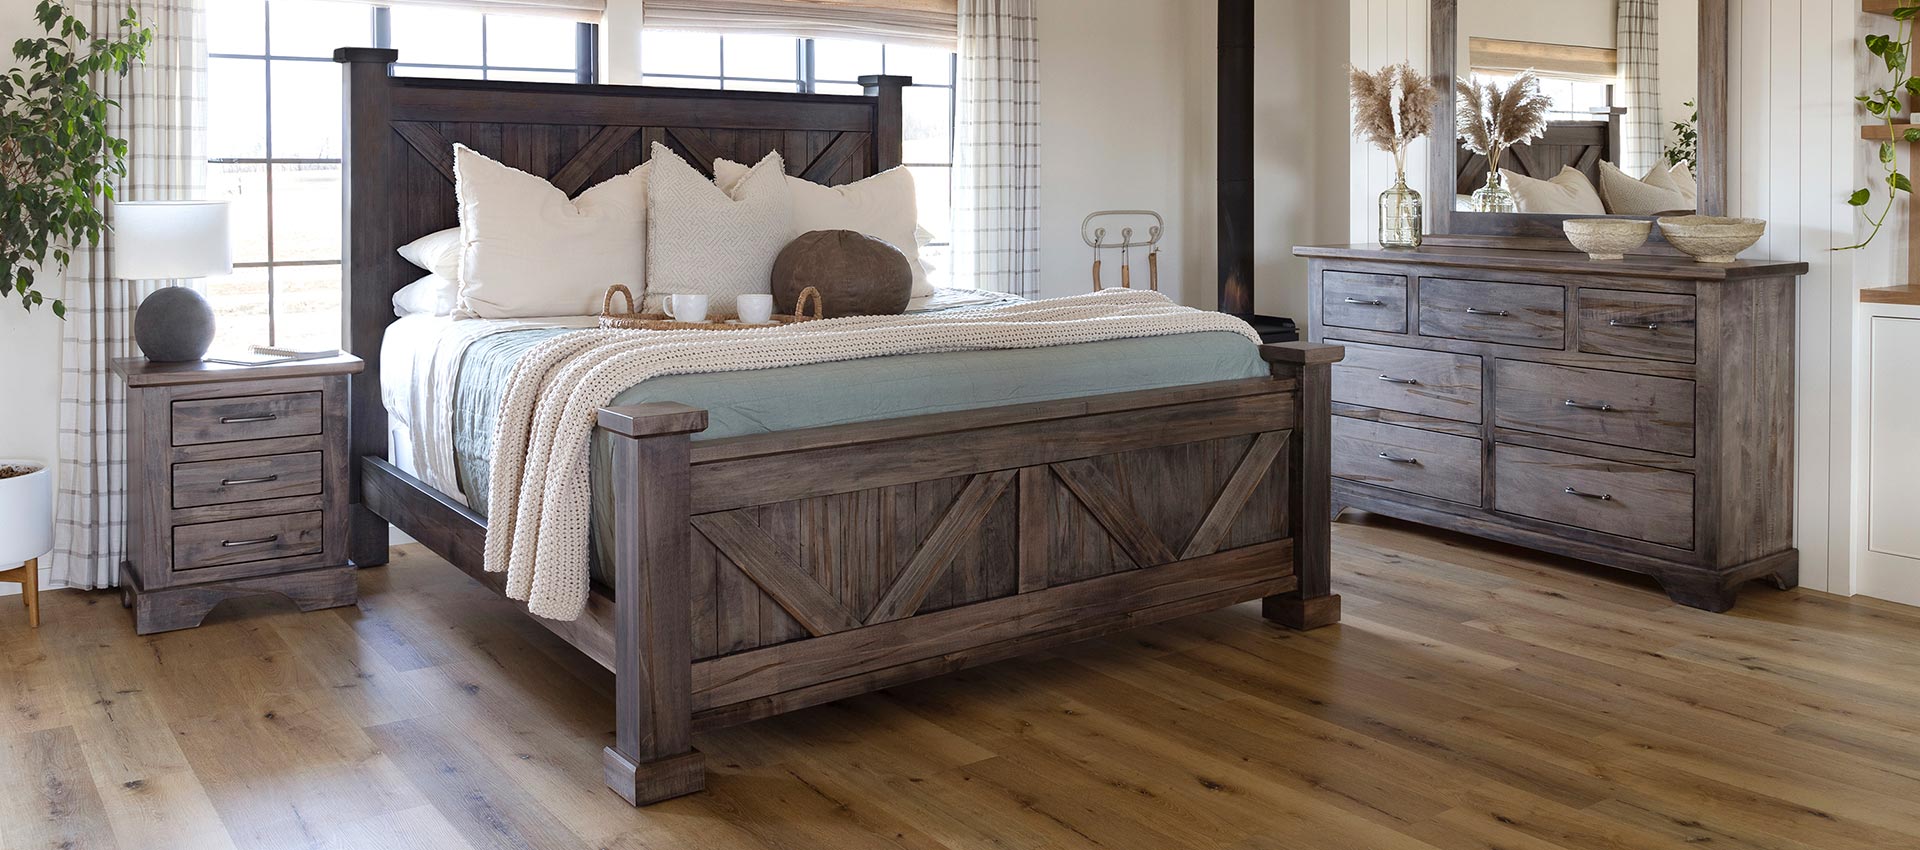 amish crafted bedroom collection